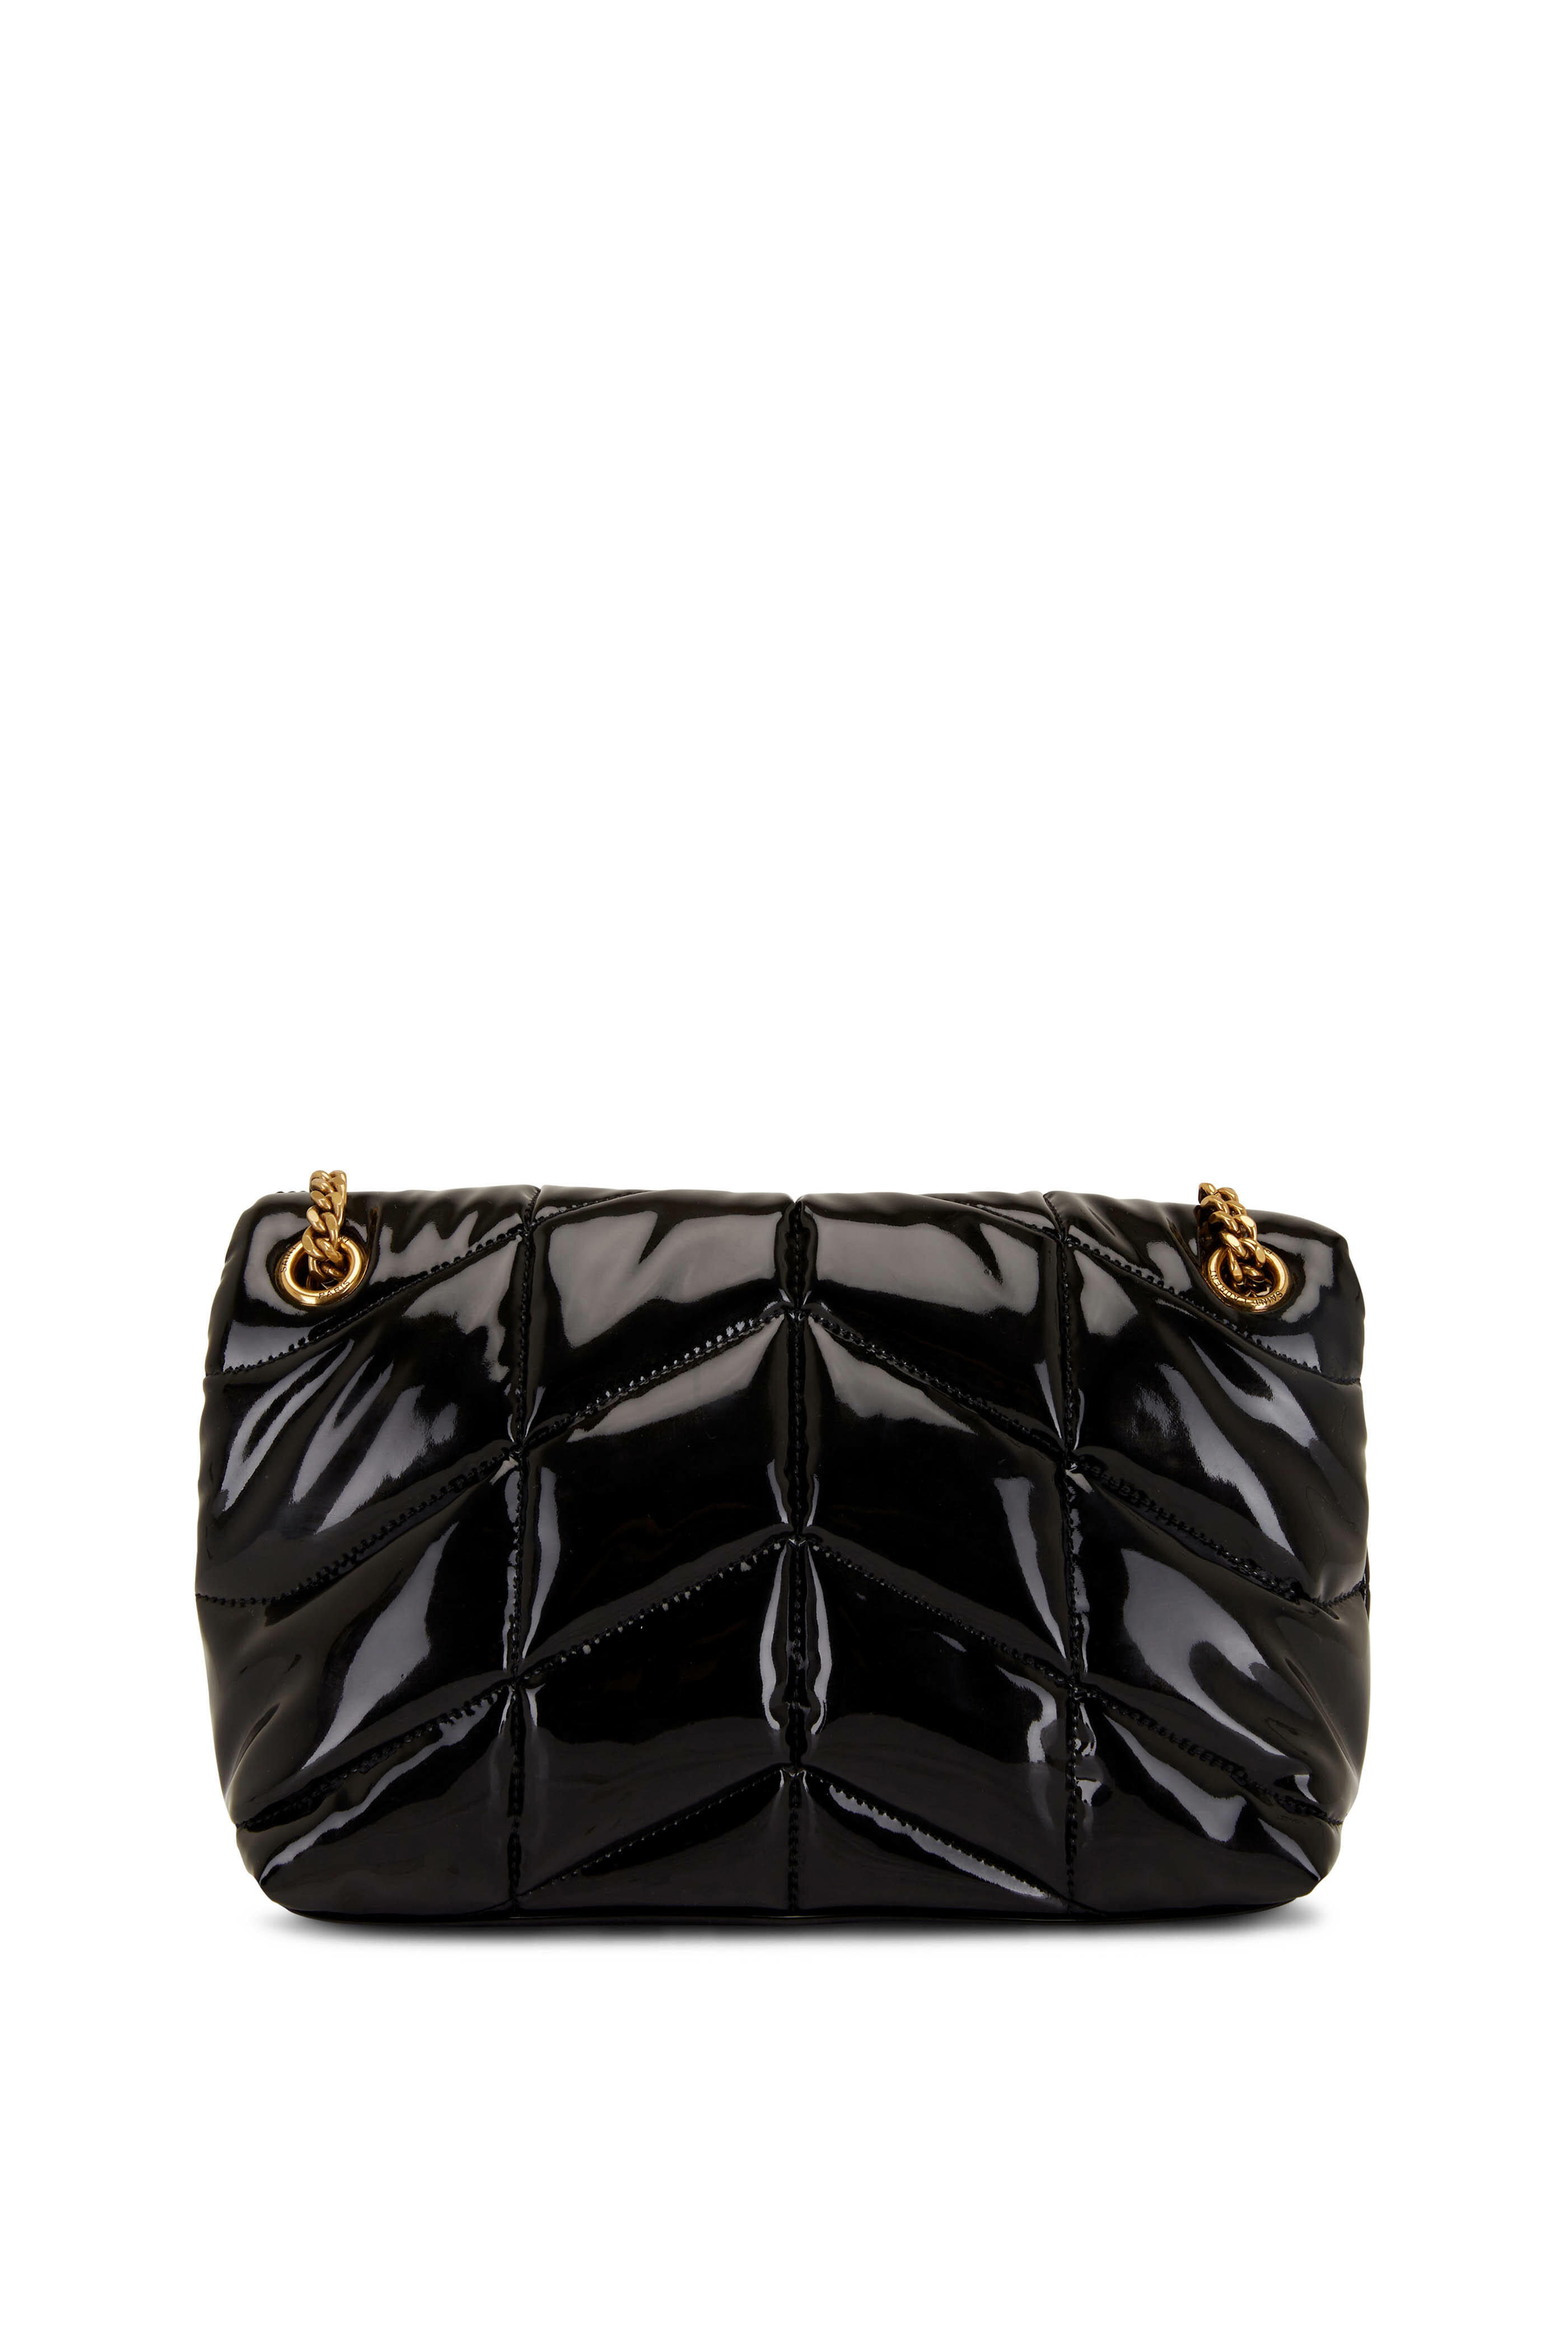 Saint Laurent - Puffer Black Quilted Vinyl Small Chain Bag